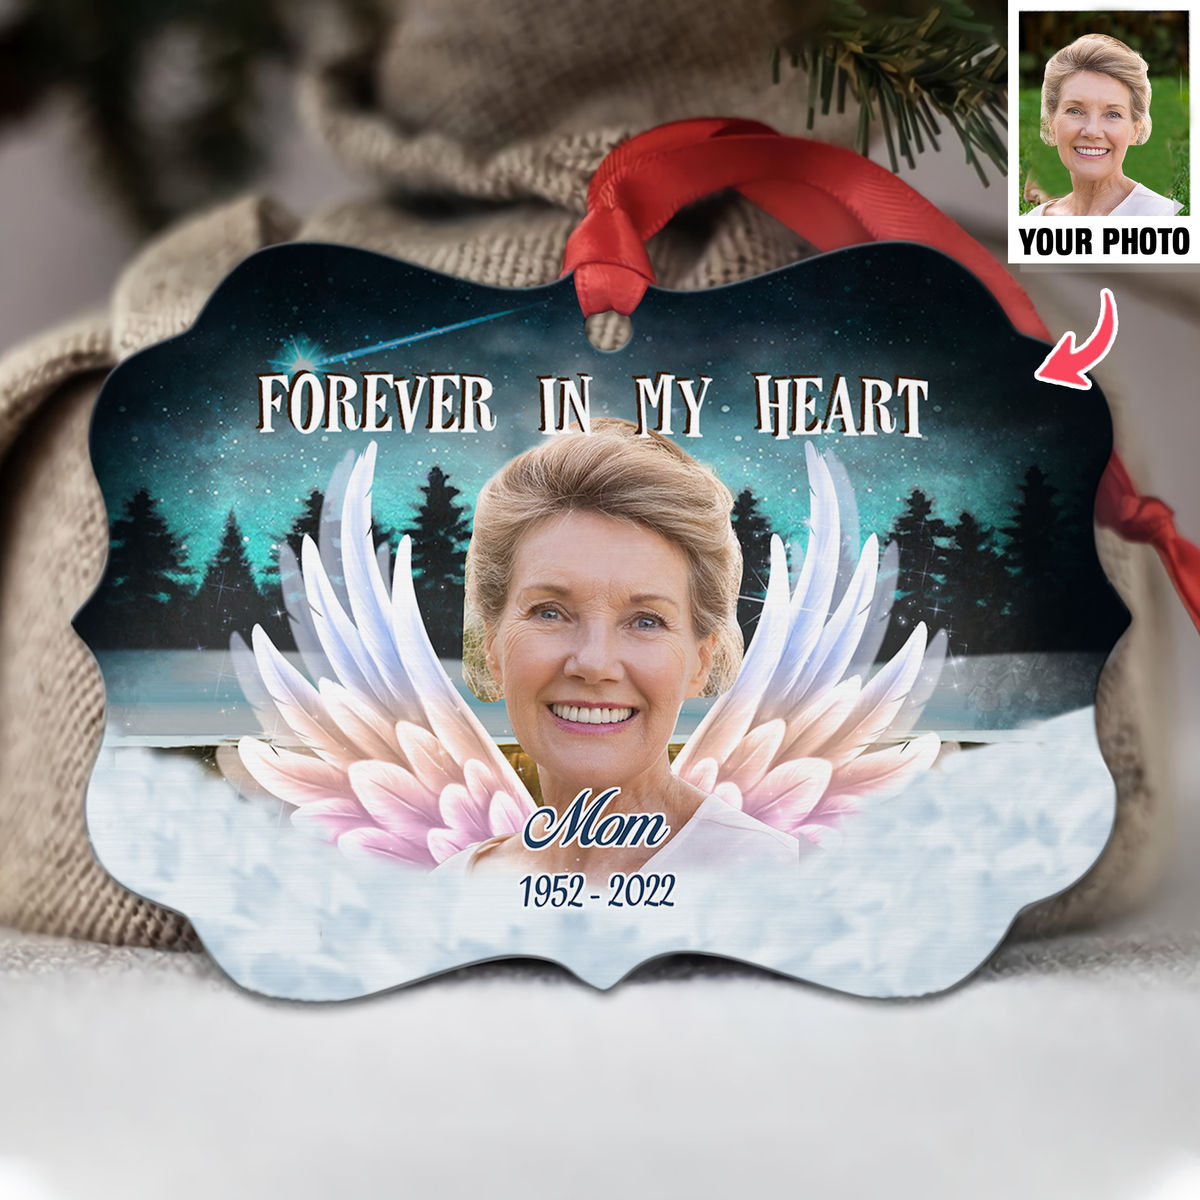 Family Memorial Ornament - Forever In My Heart - Custom Ornament from Photo - Christmas Gifts For Family_1